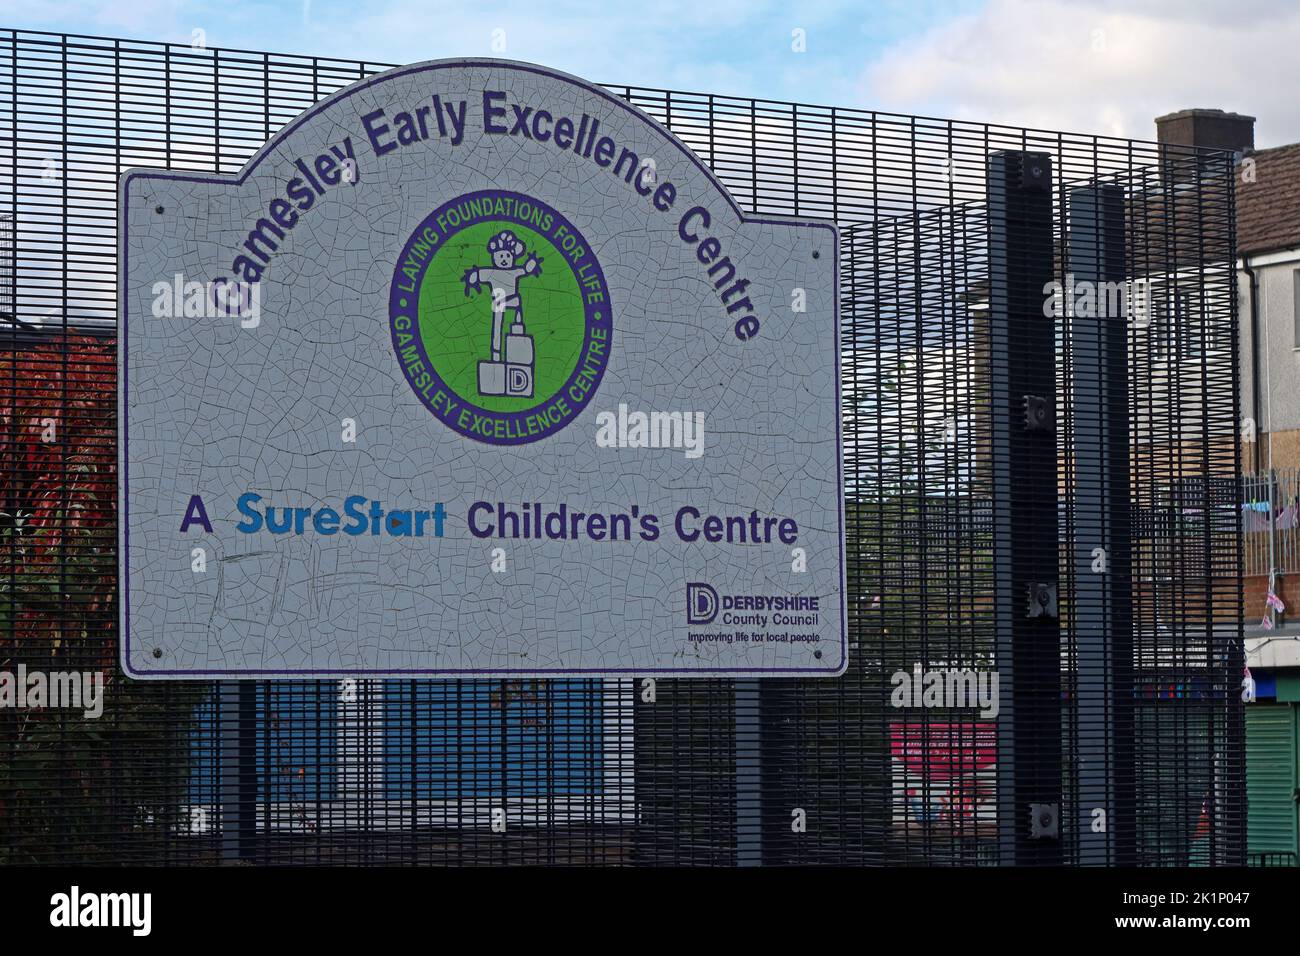 SureStart Childrens Centre, Gamesley early excellence centre, Derbyshire County Council - Winster Mews, Gamesley, Glossop, Derbyshire, SK13 0LU Stock Photo